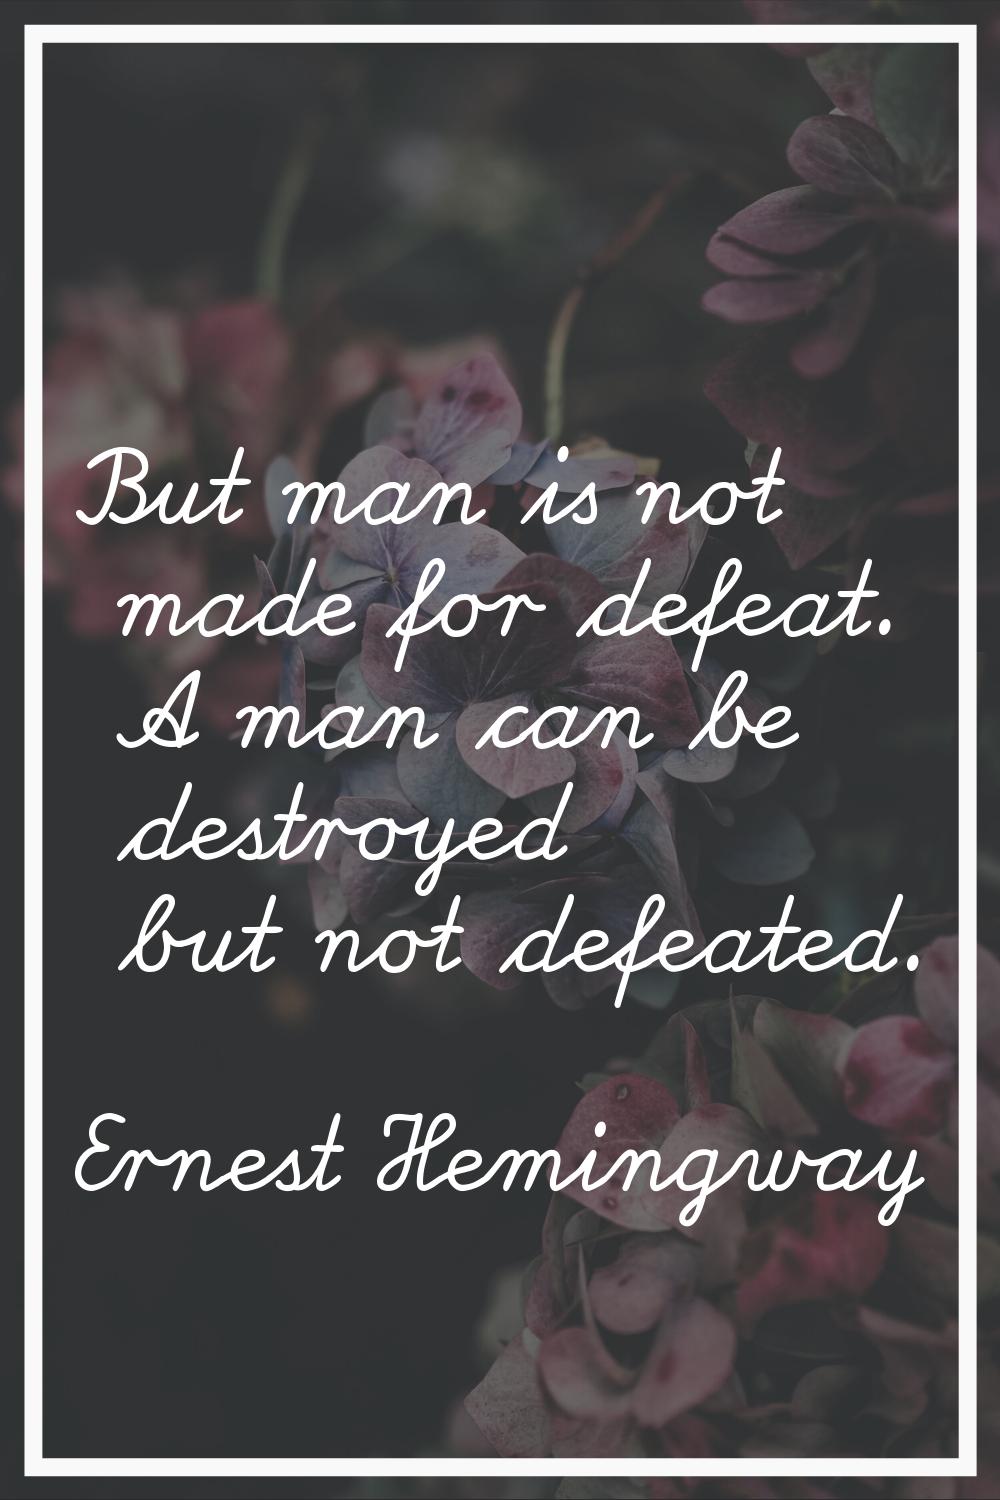 But man is not made for defeat. A man can be destroyed but not defeated.